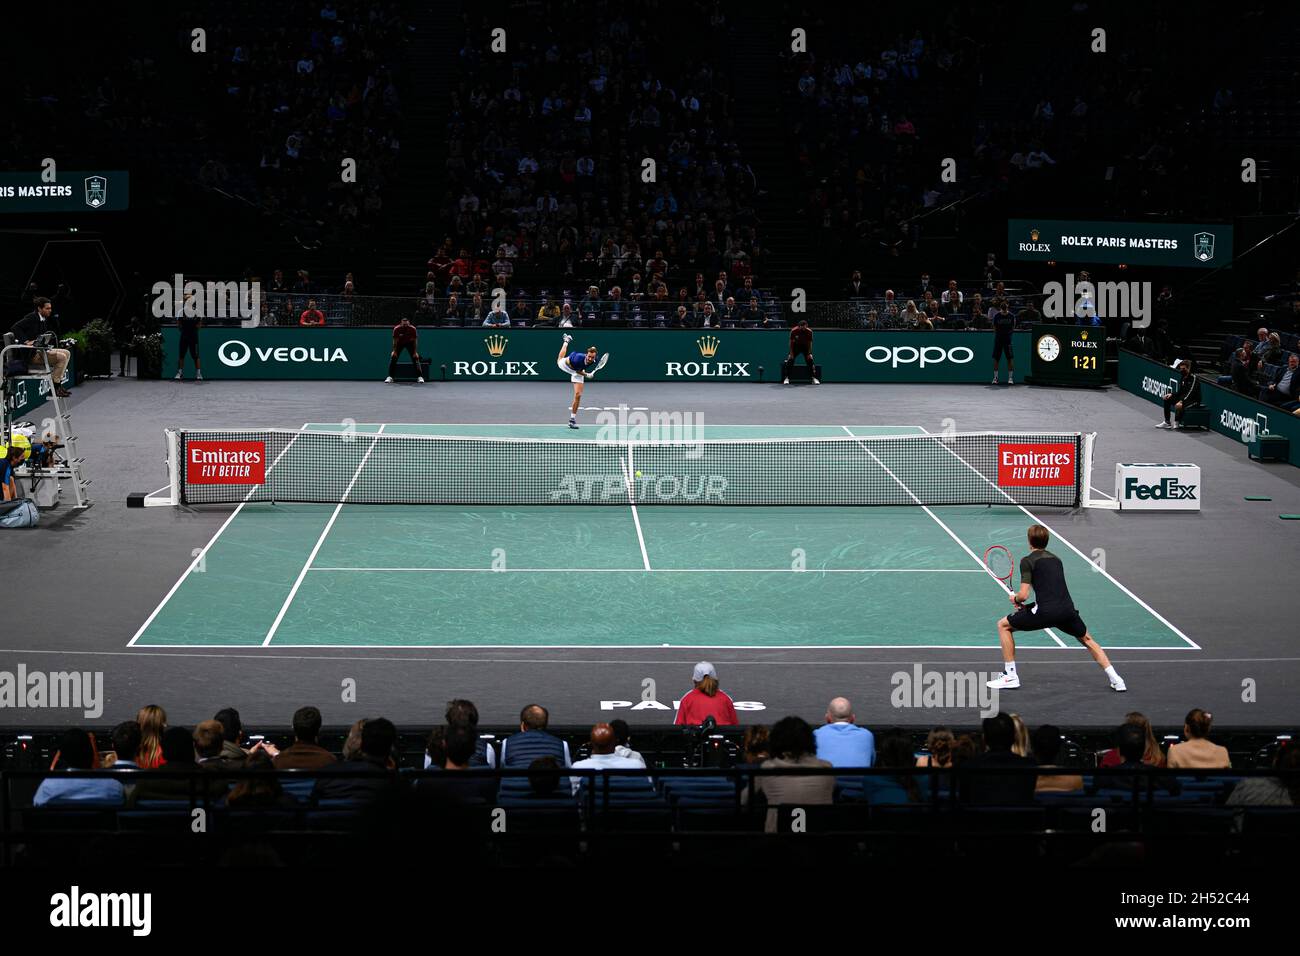 General view illustration of the center court where compete Daniil Medvedev  of Russia (serving, up) and Ilya Ivashka of Belarus (down) during the Rolex Paris  Masters 2021, ATP Masters 1000 tennis tournament,